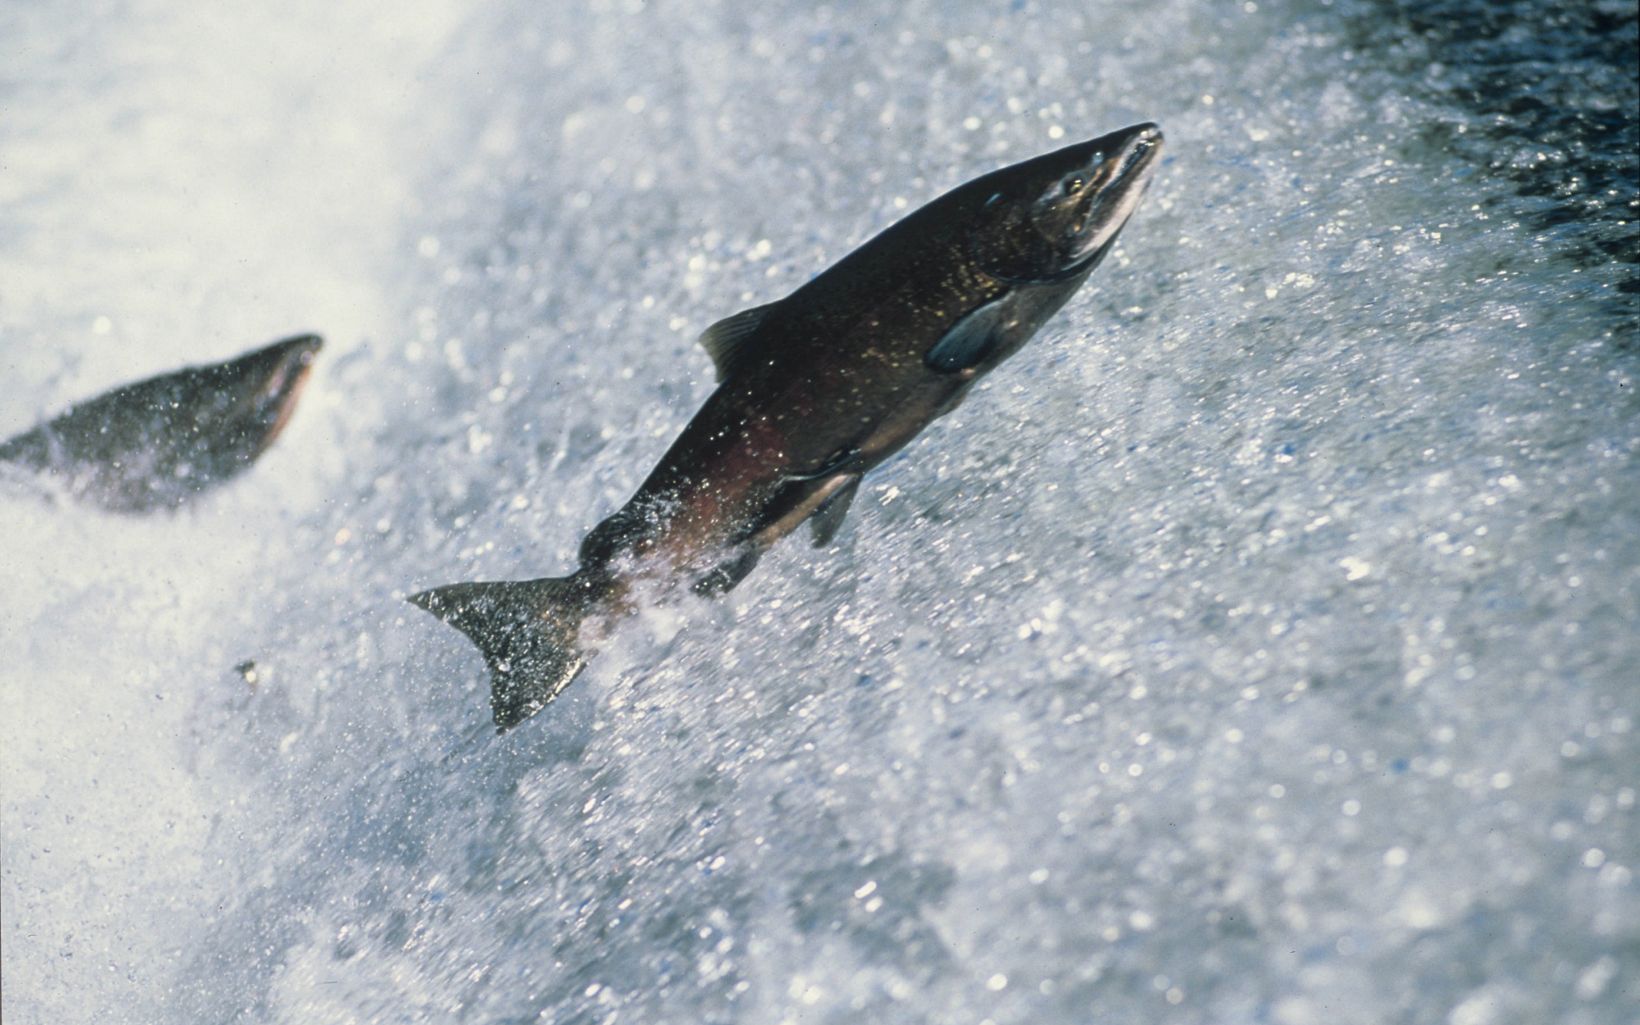 salmon jumping out of the water as it swims upstream